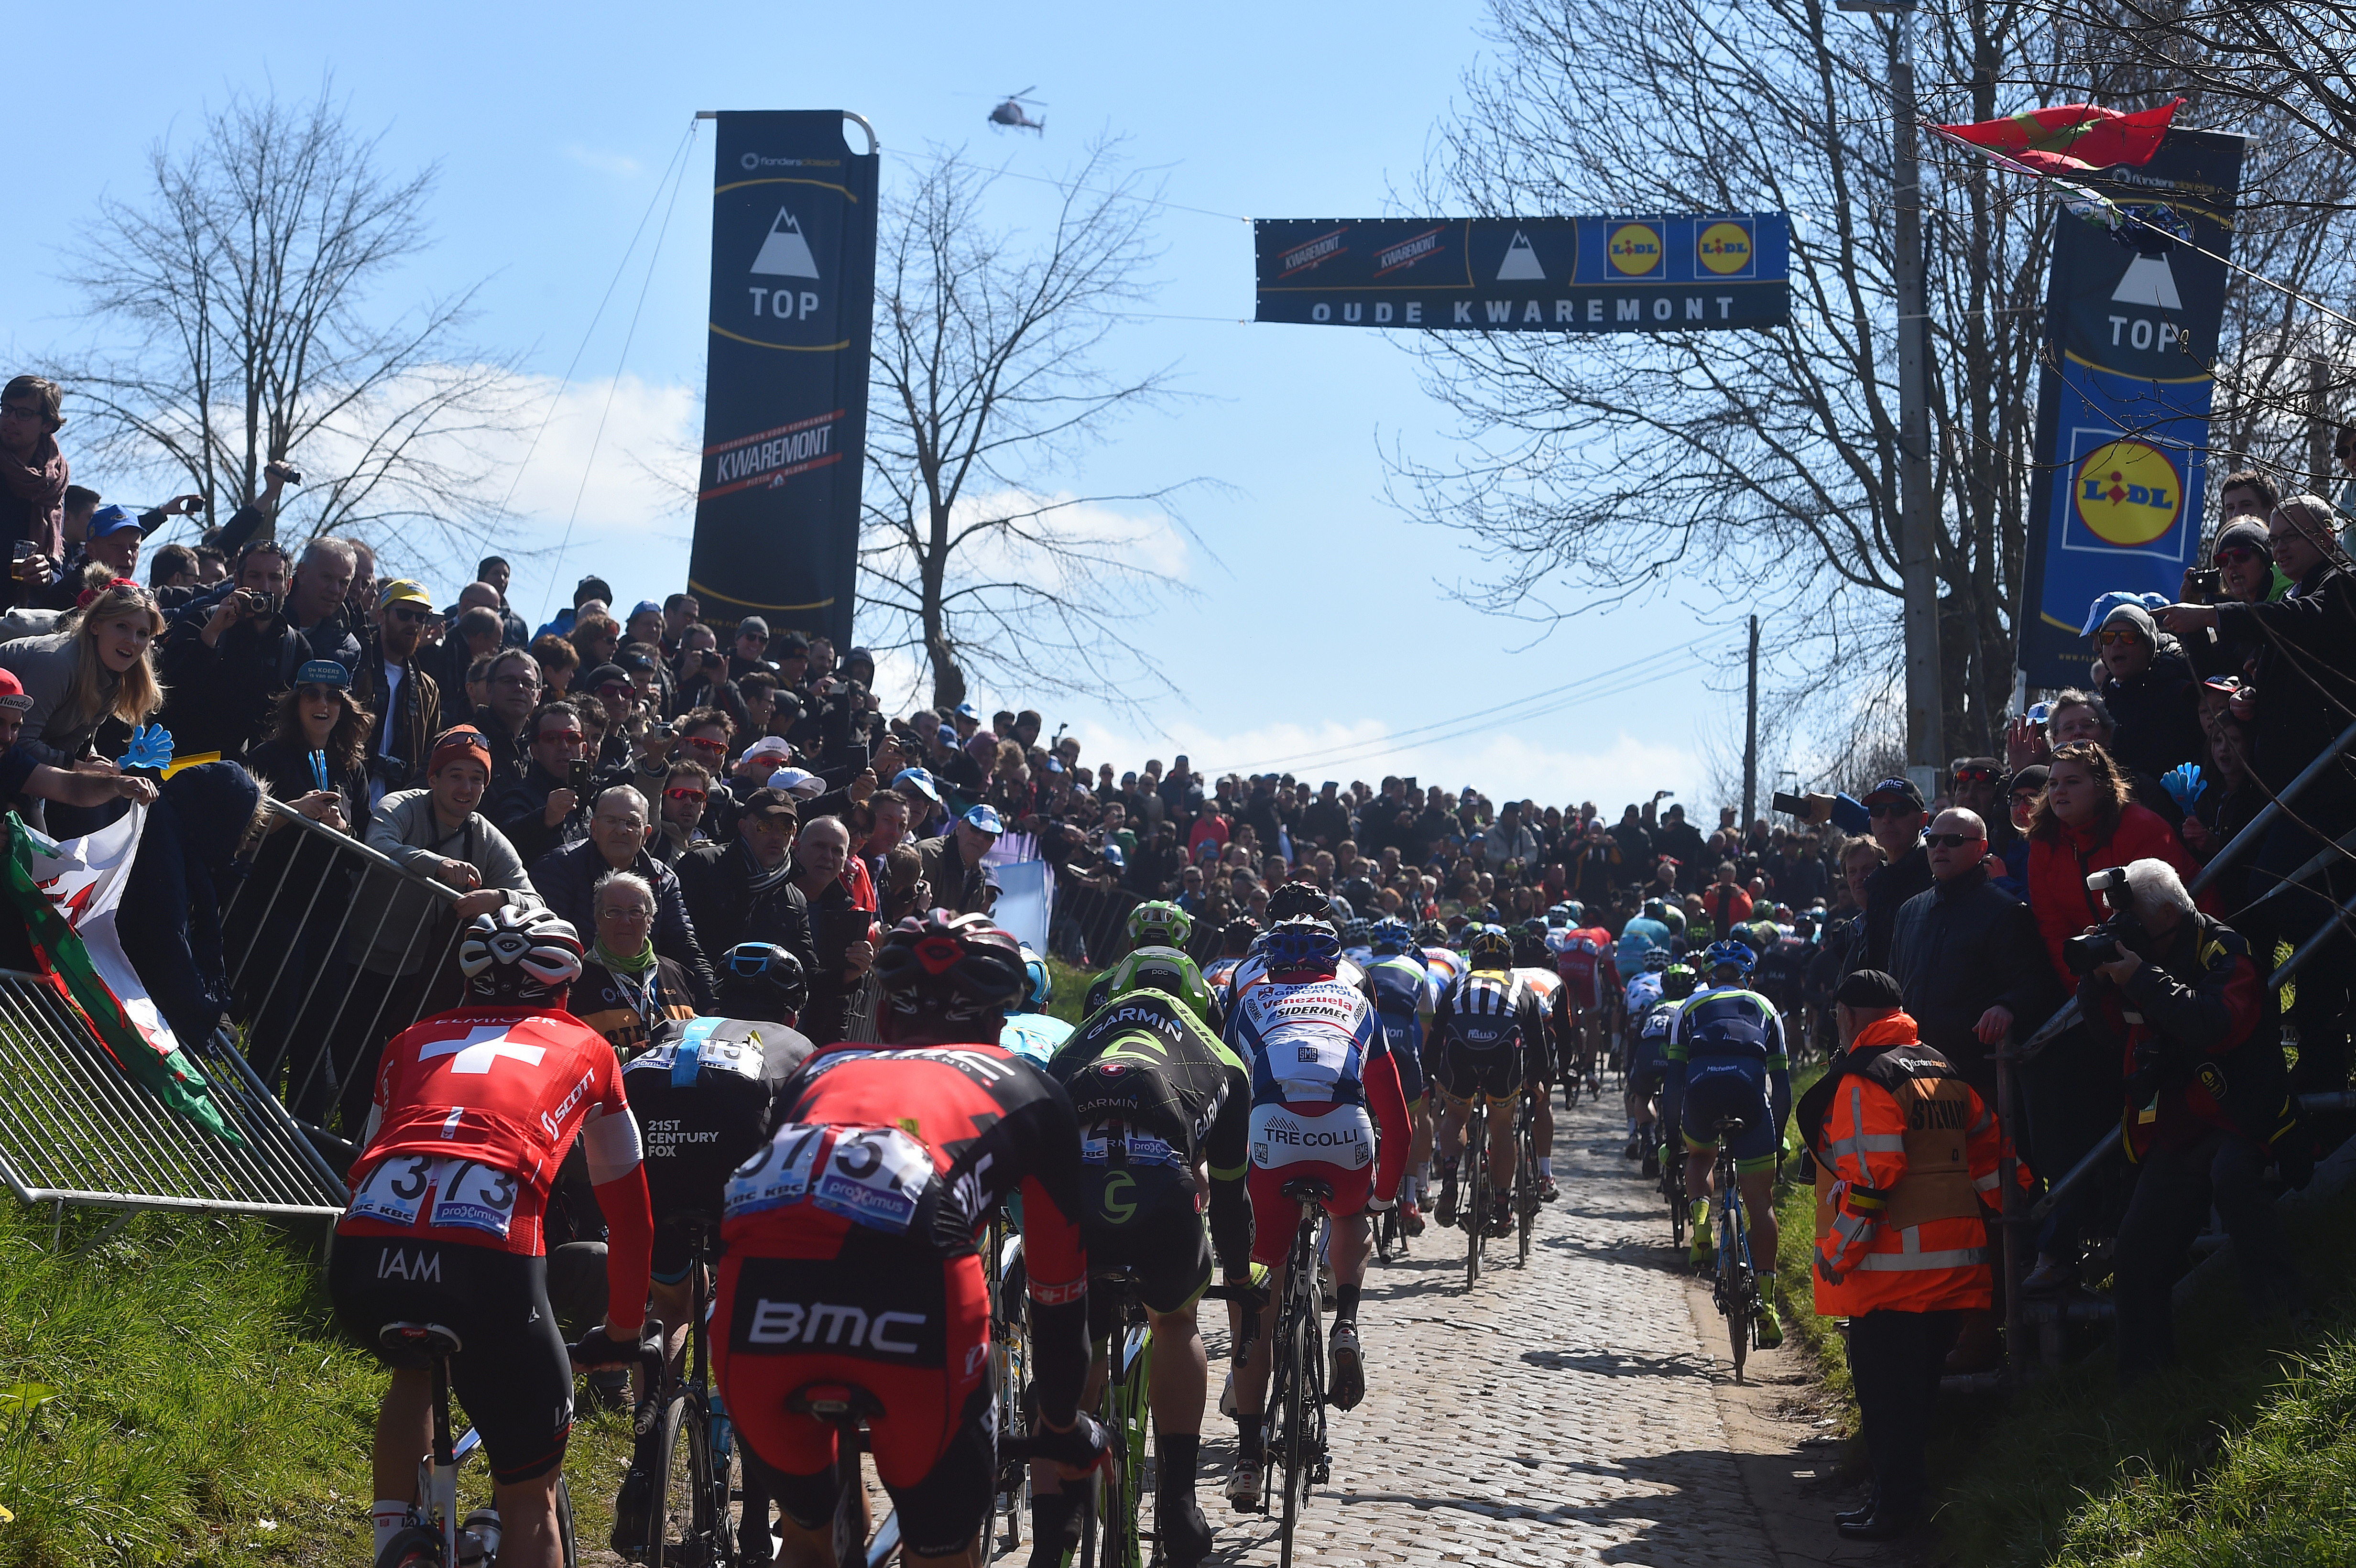 https://www.velonews.com/2019/04/analysis/which-flanders-climb-is-the-hardest-we-asked-the-riders_492128